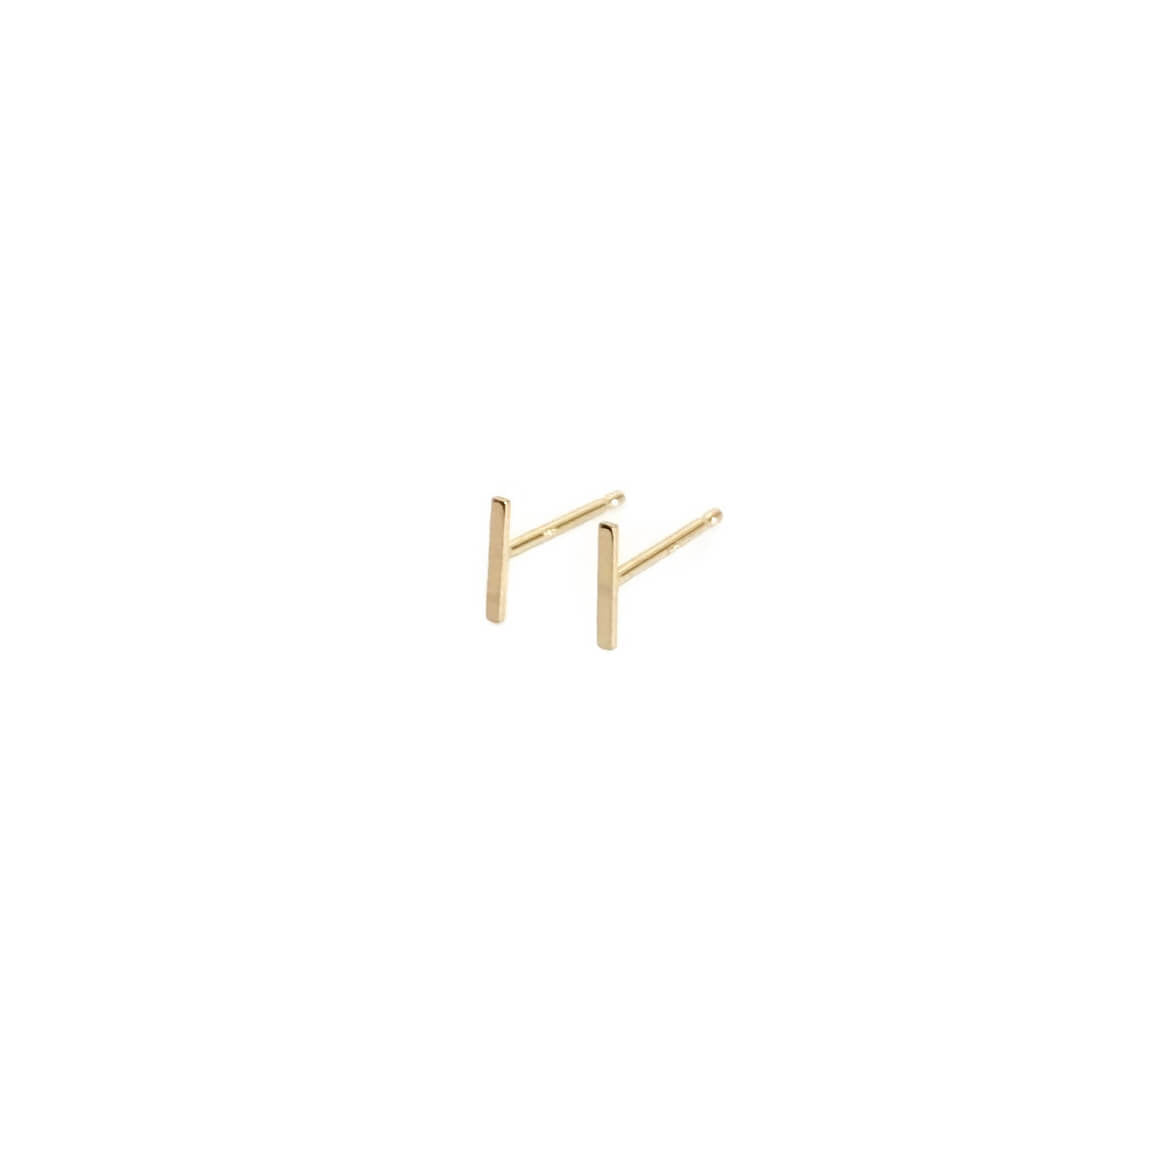 14k solid gold bar earrings are dainty and made of real 14k gold.  It's a gold bar stud earrings that come in pair for pierced ears.